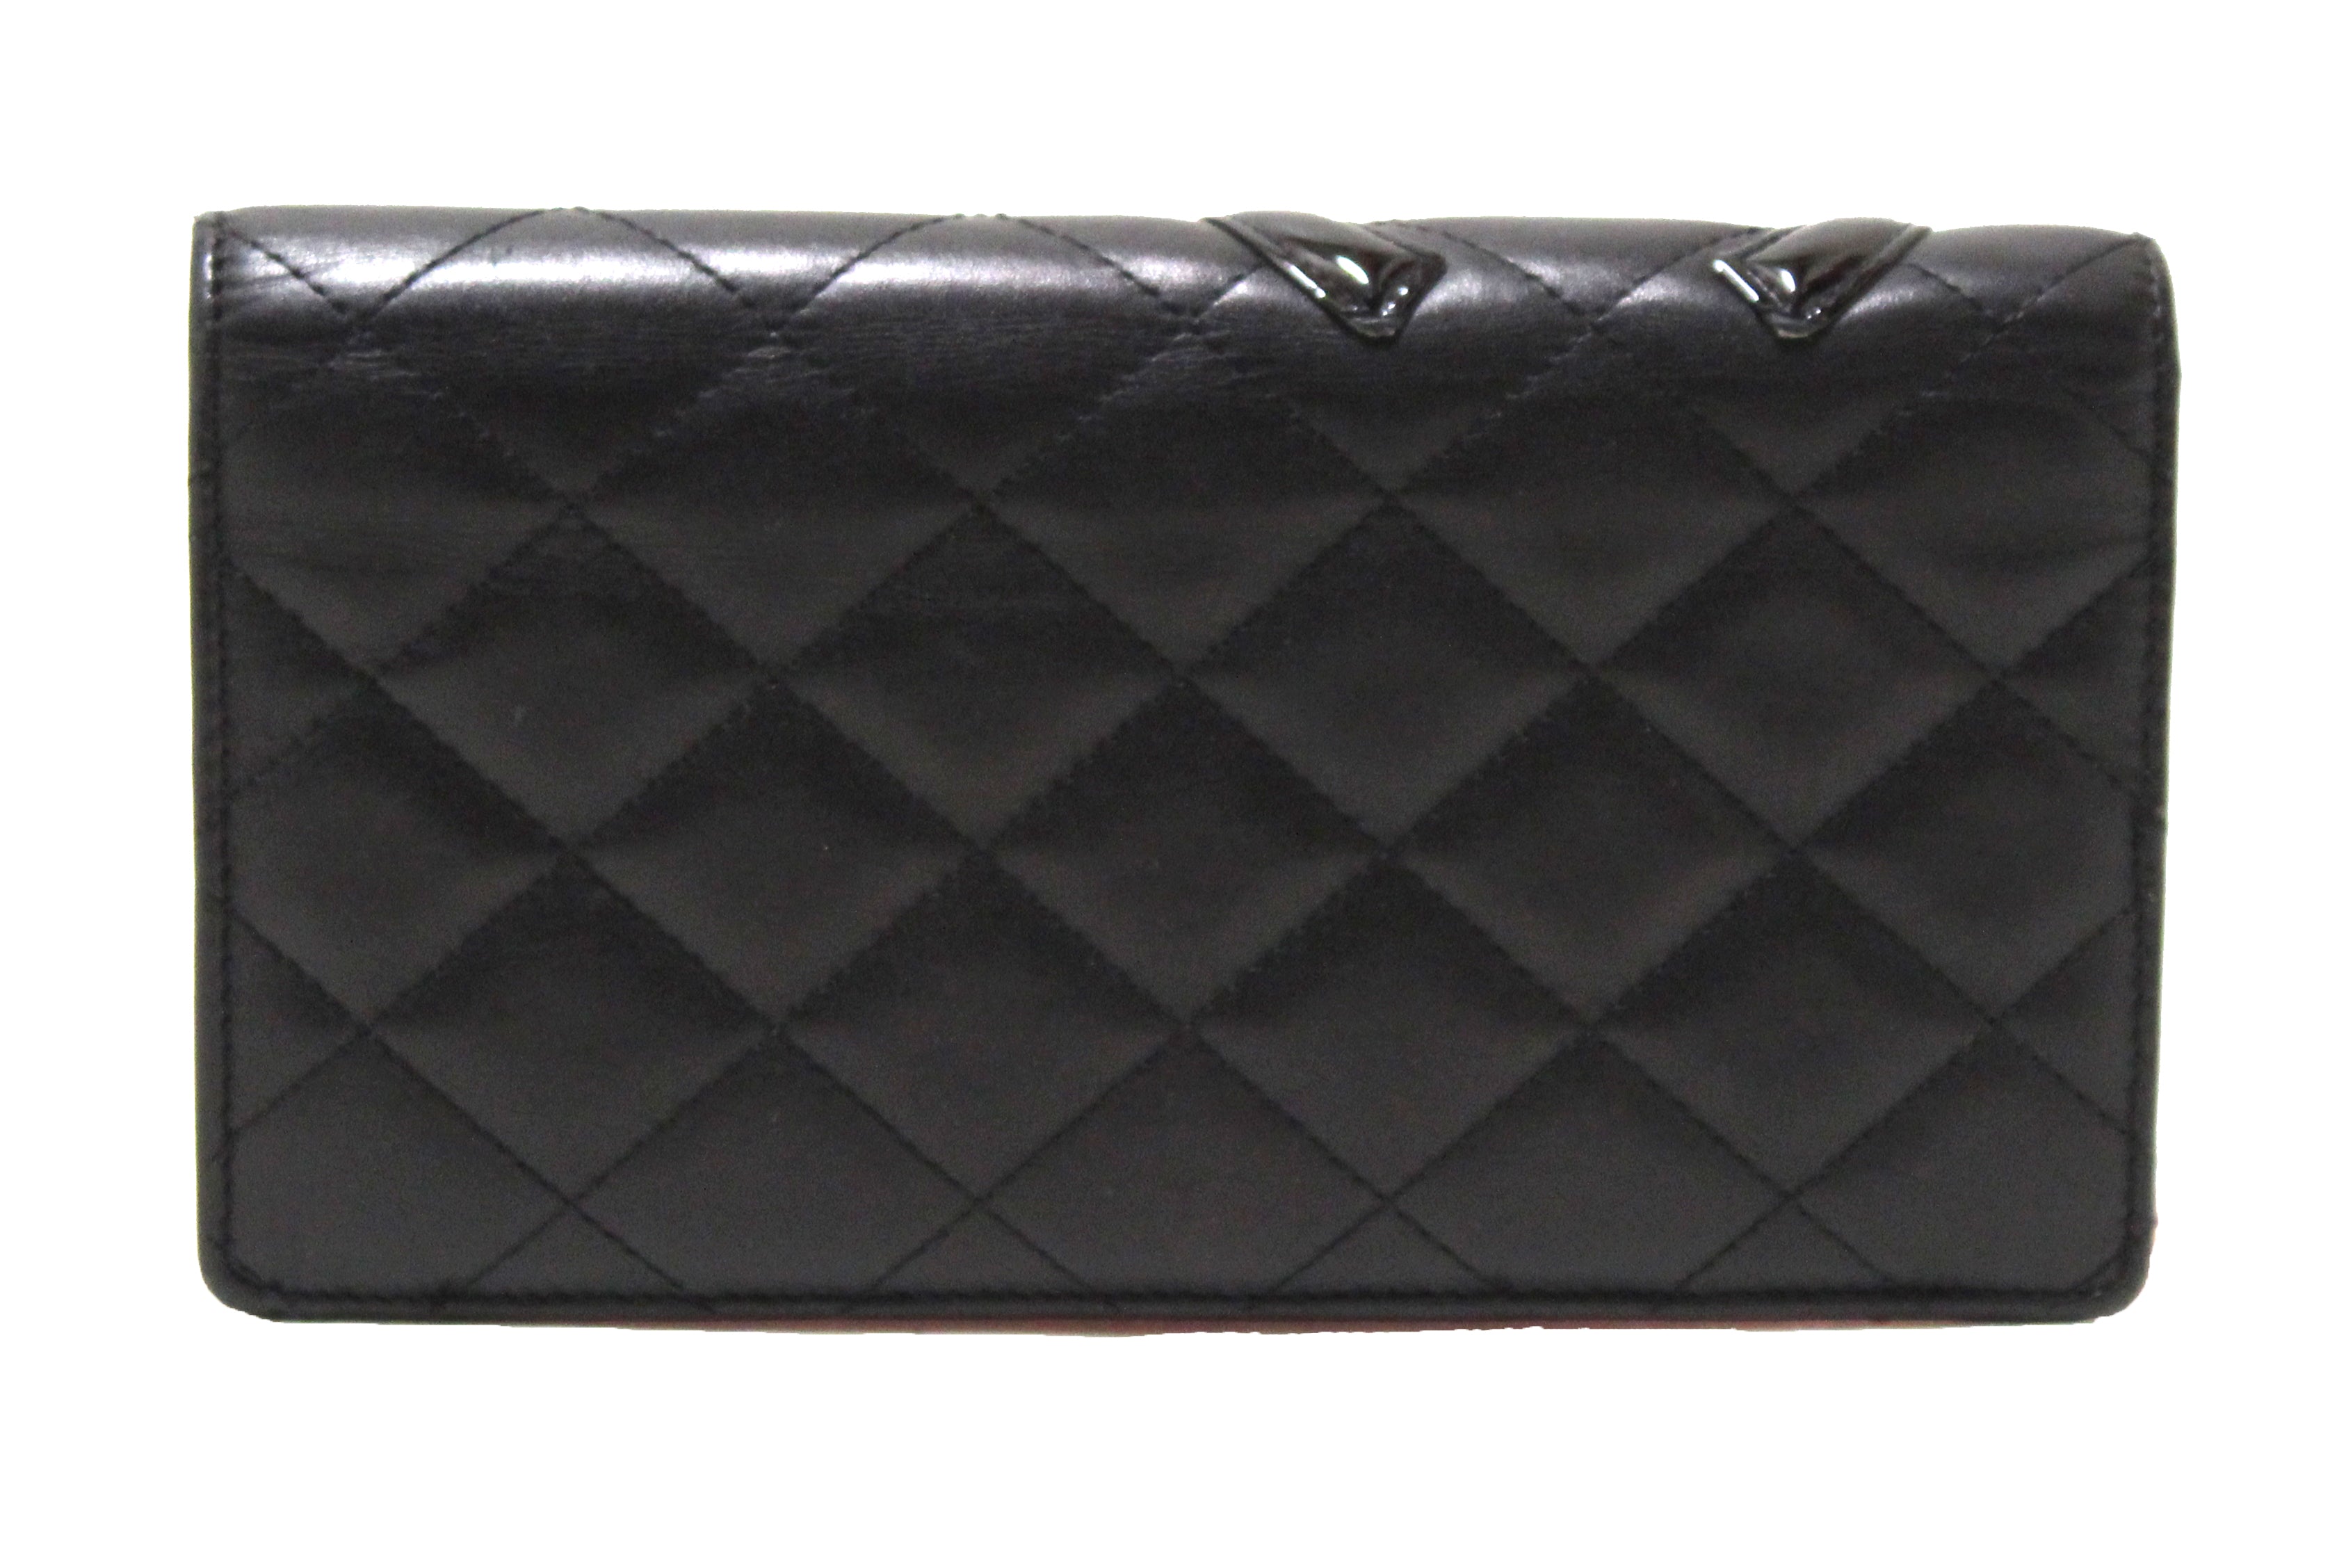 Authentic Chanel Black Quilted Calfskin Leather Cambon Wallet